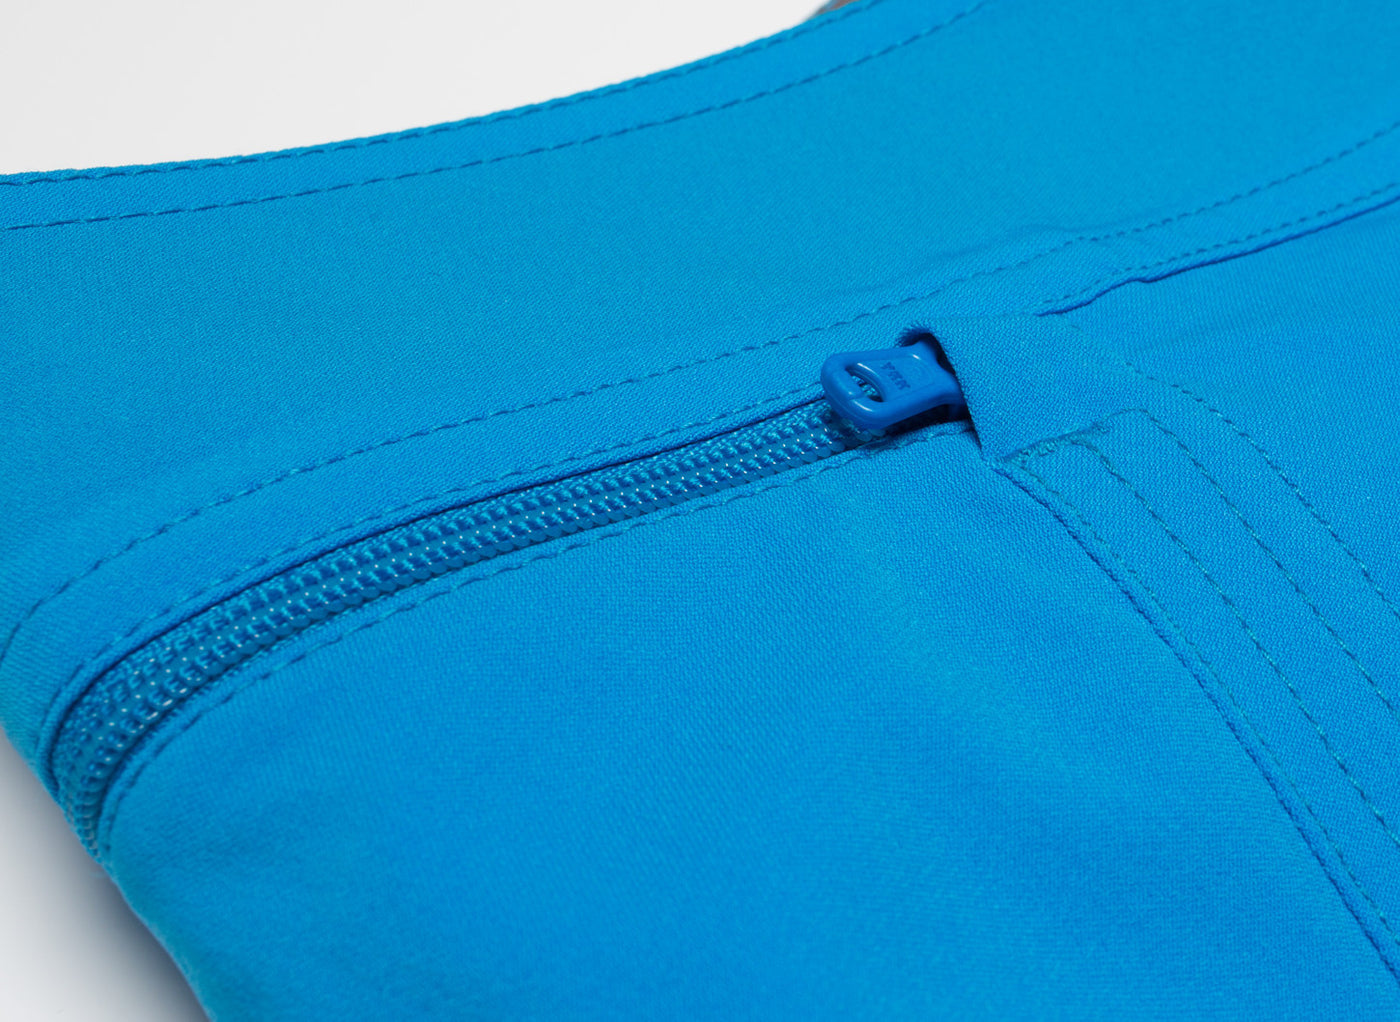 Built to Last: Recycled, non-corrosive zippers | by BLUESMITHS